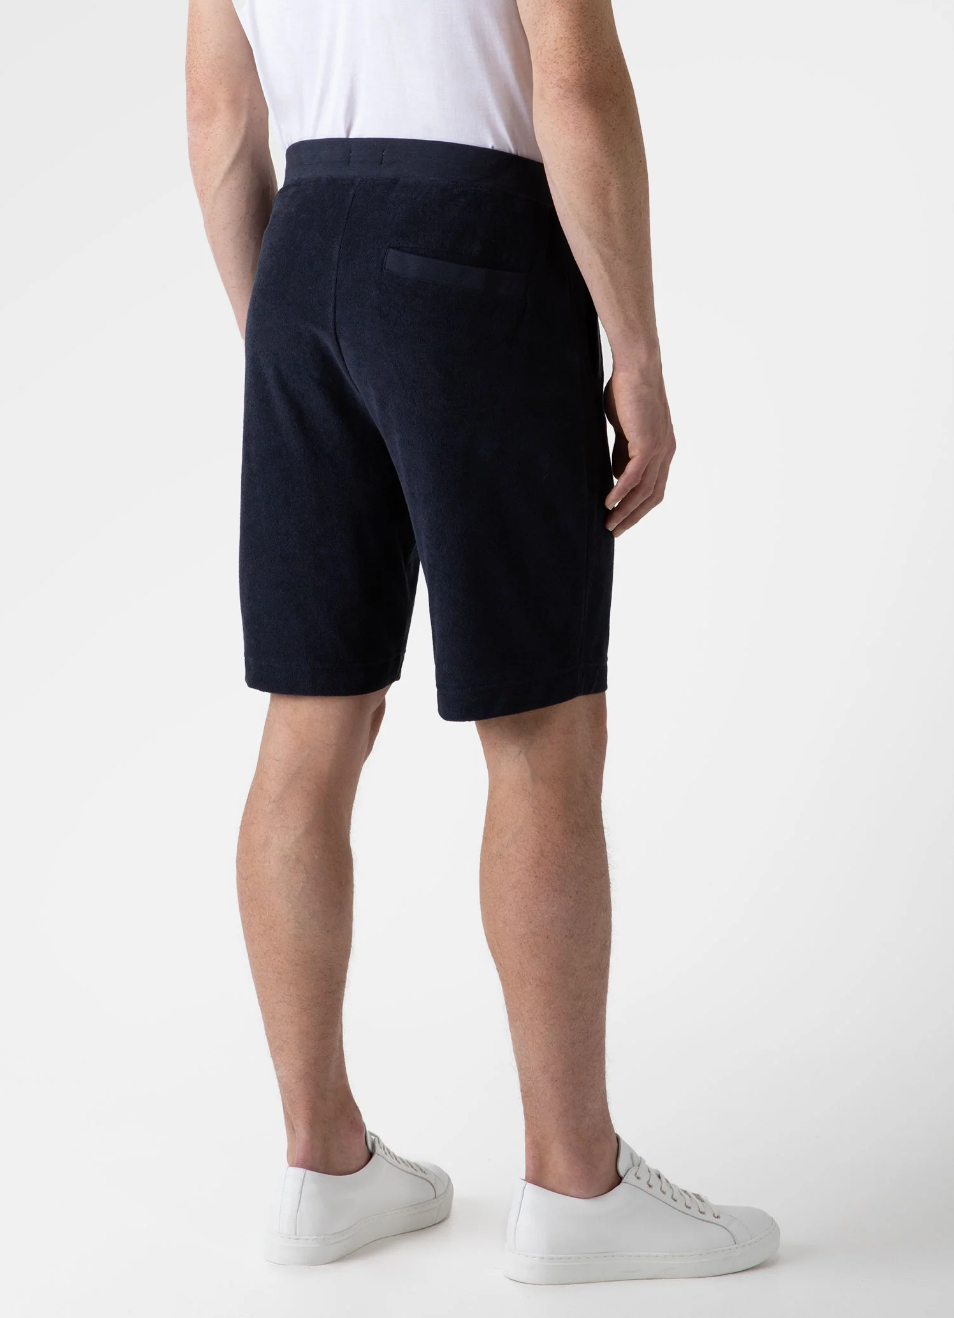 Towelling Shorts Navy